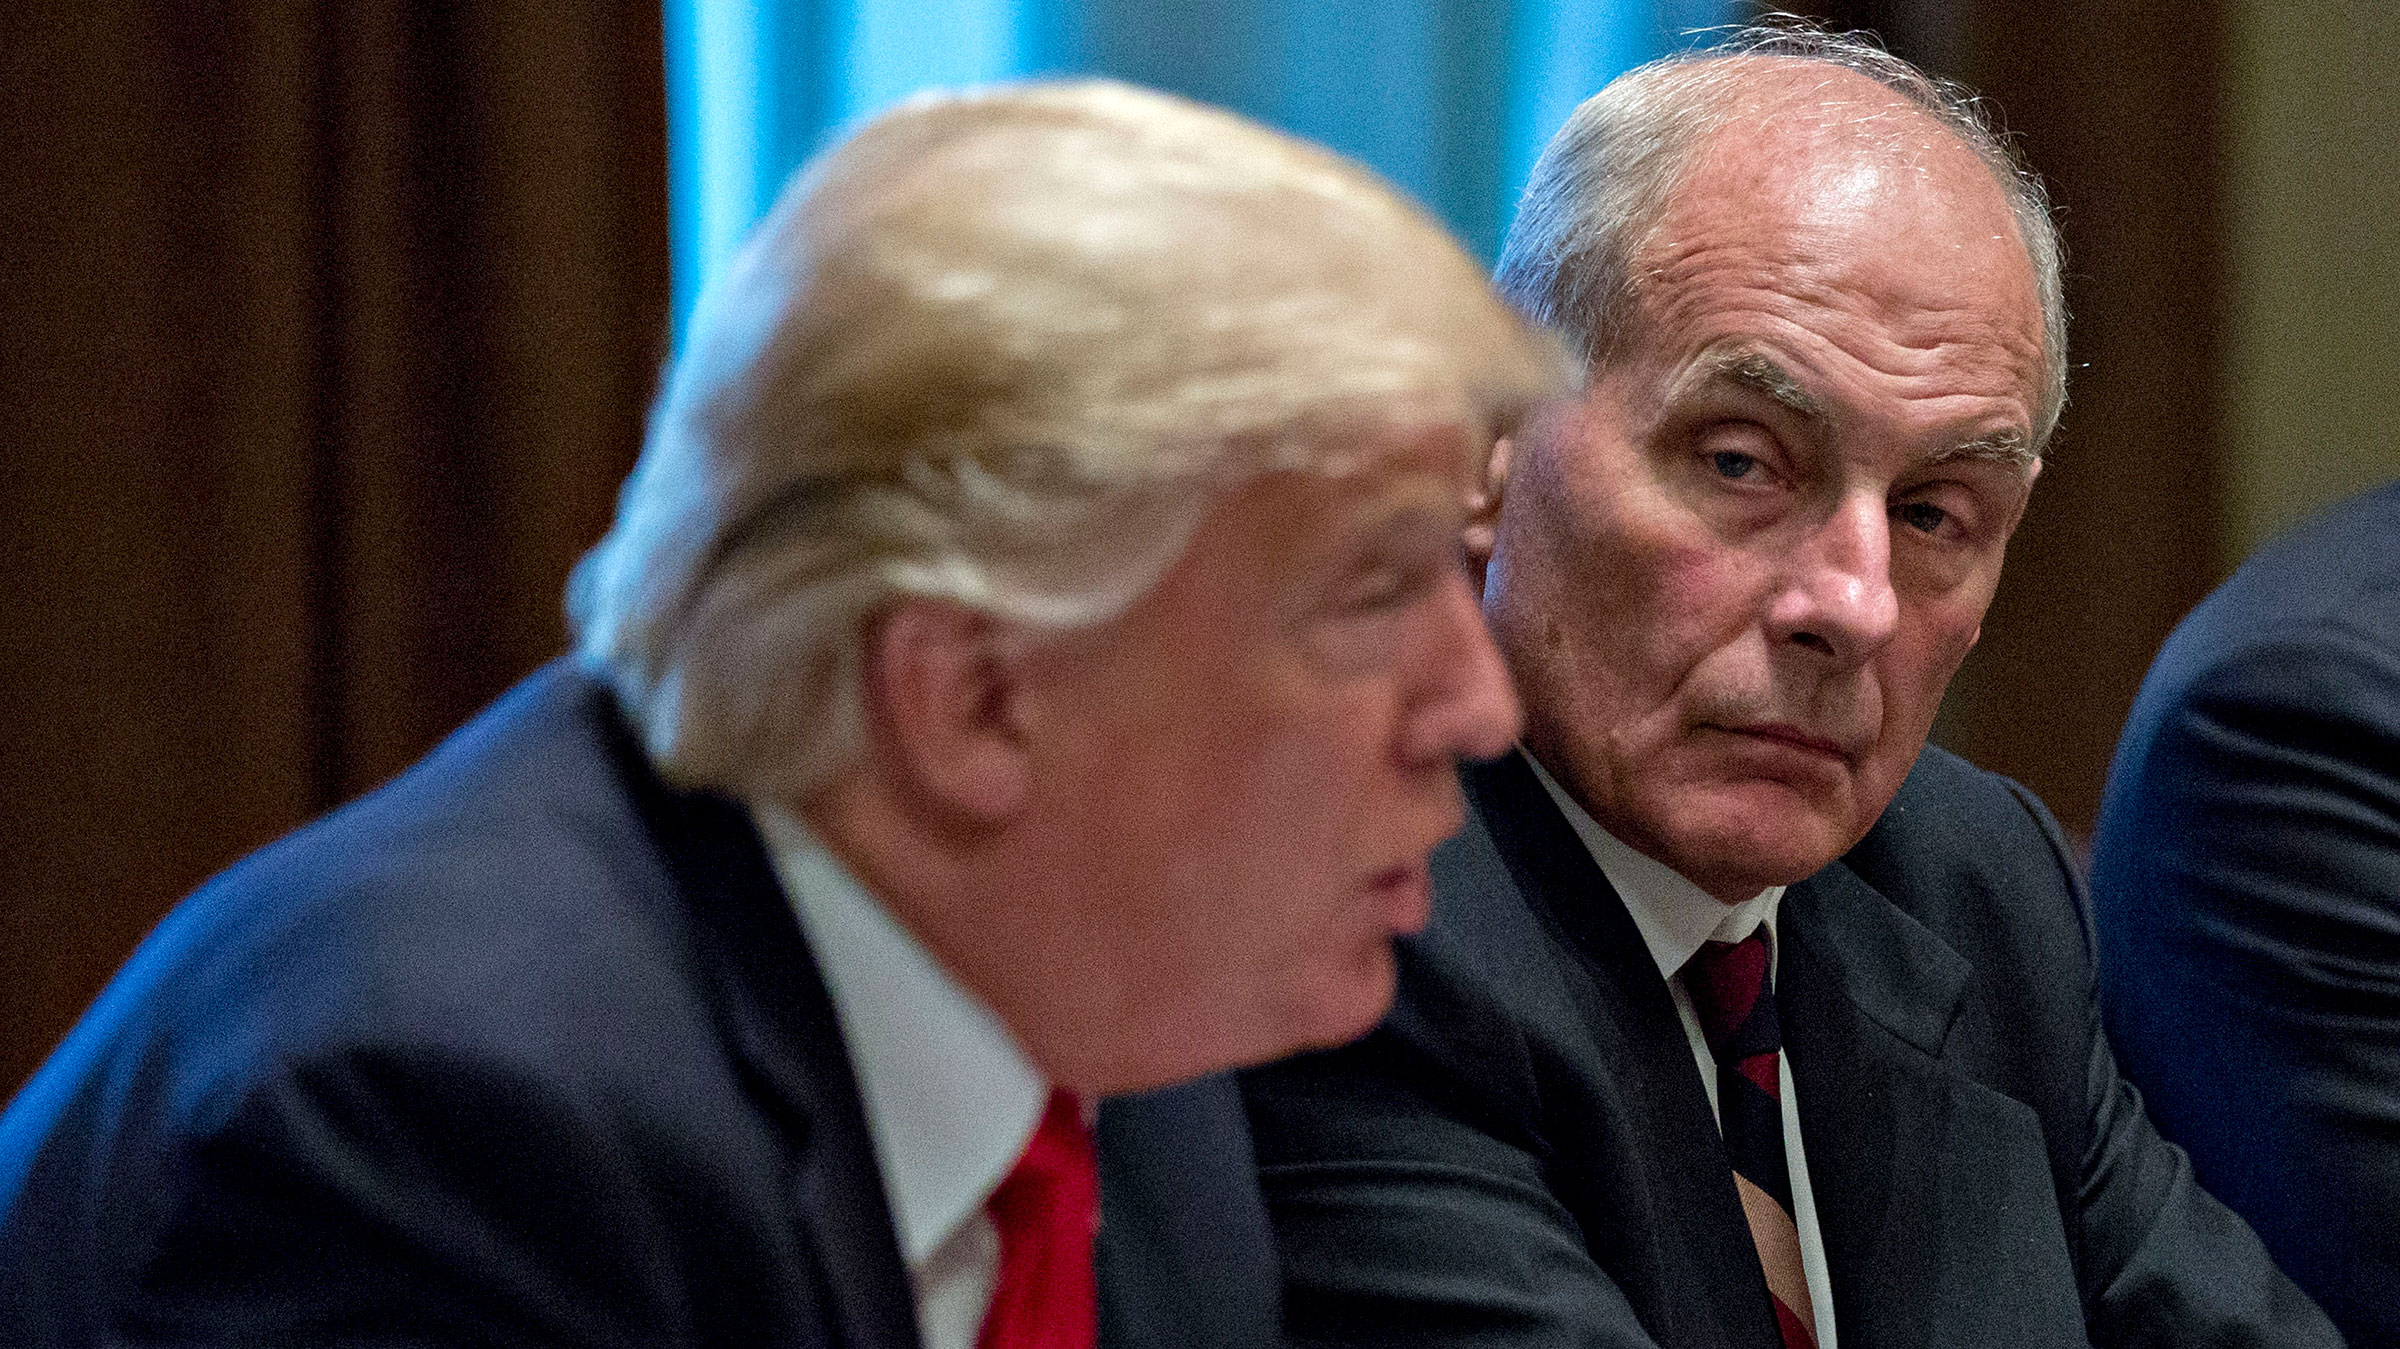 Former Chief of Staff John Kelly listens as President Donald Trump speaks at a briefing on October 5, 2017 in Washington, D.C. 